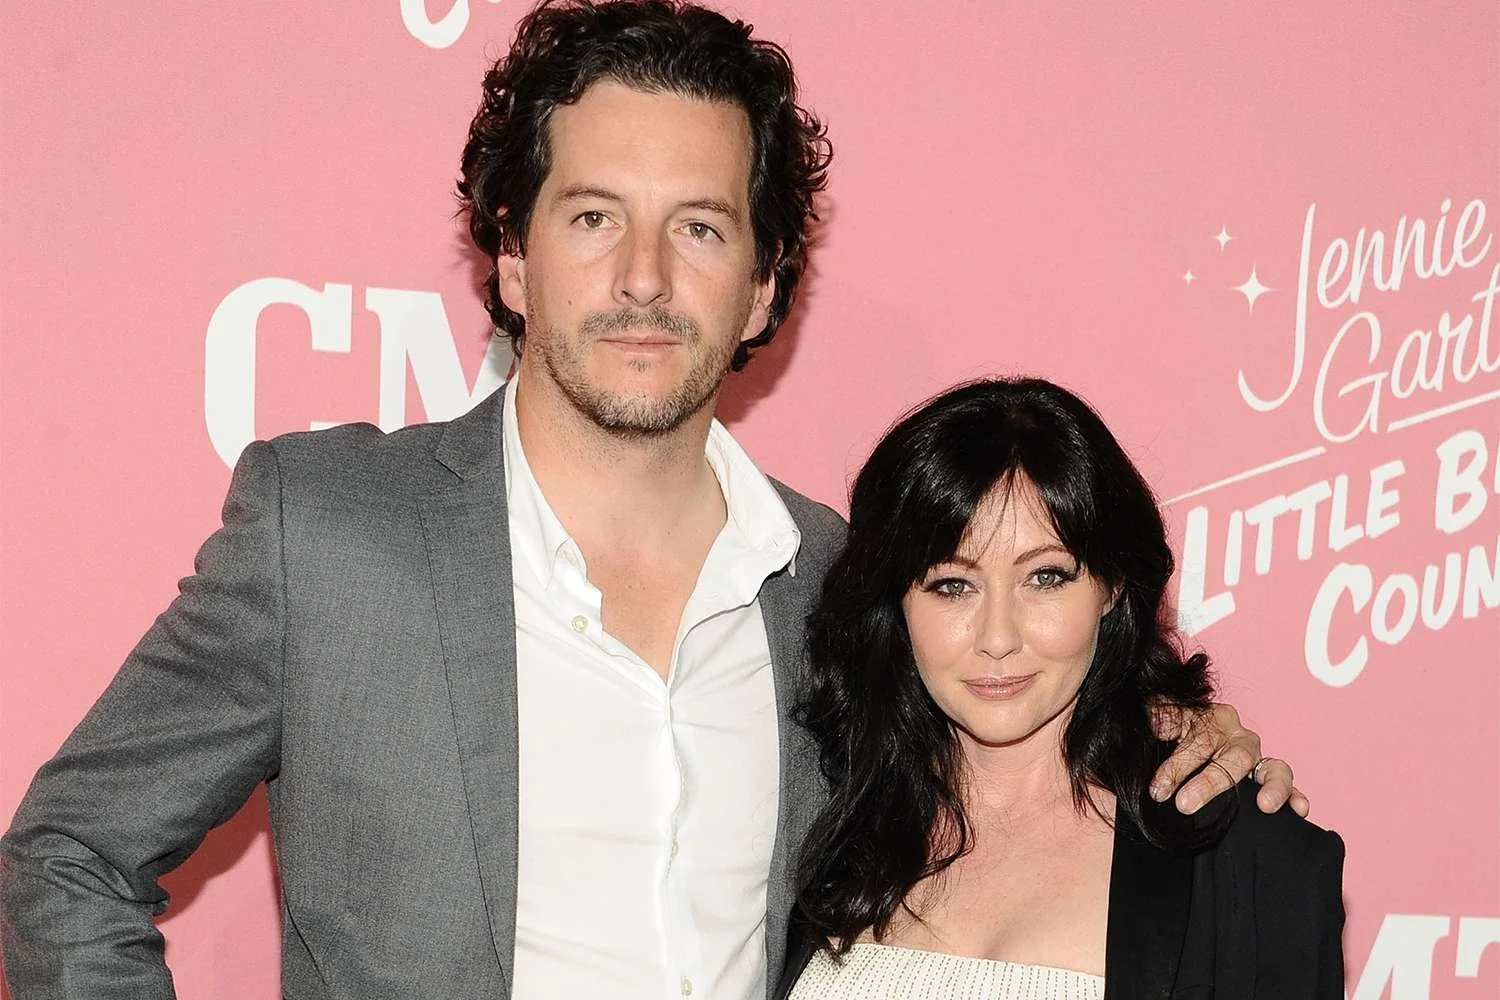 Shannen Doherty’s Ex Denies Affair, But She Vows ‘Truth Matters’